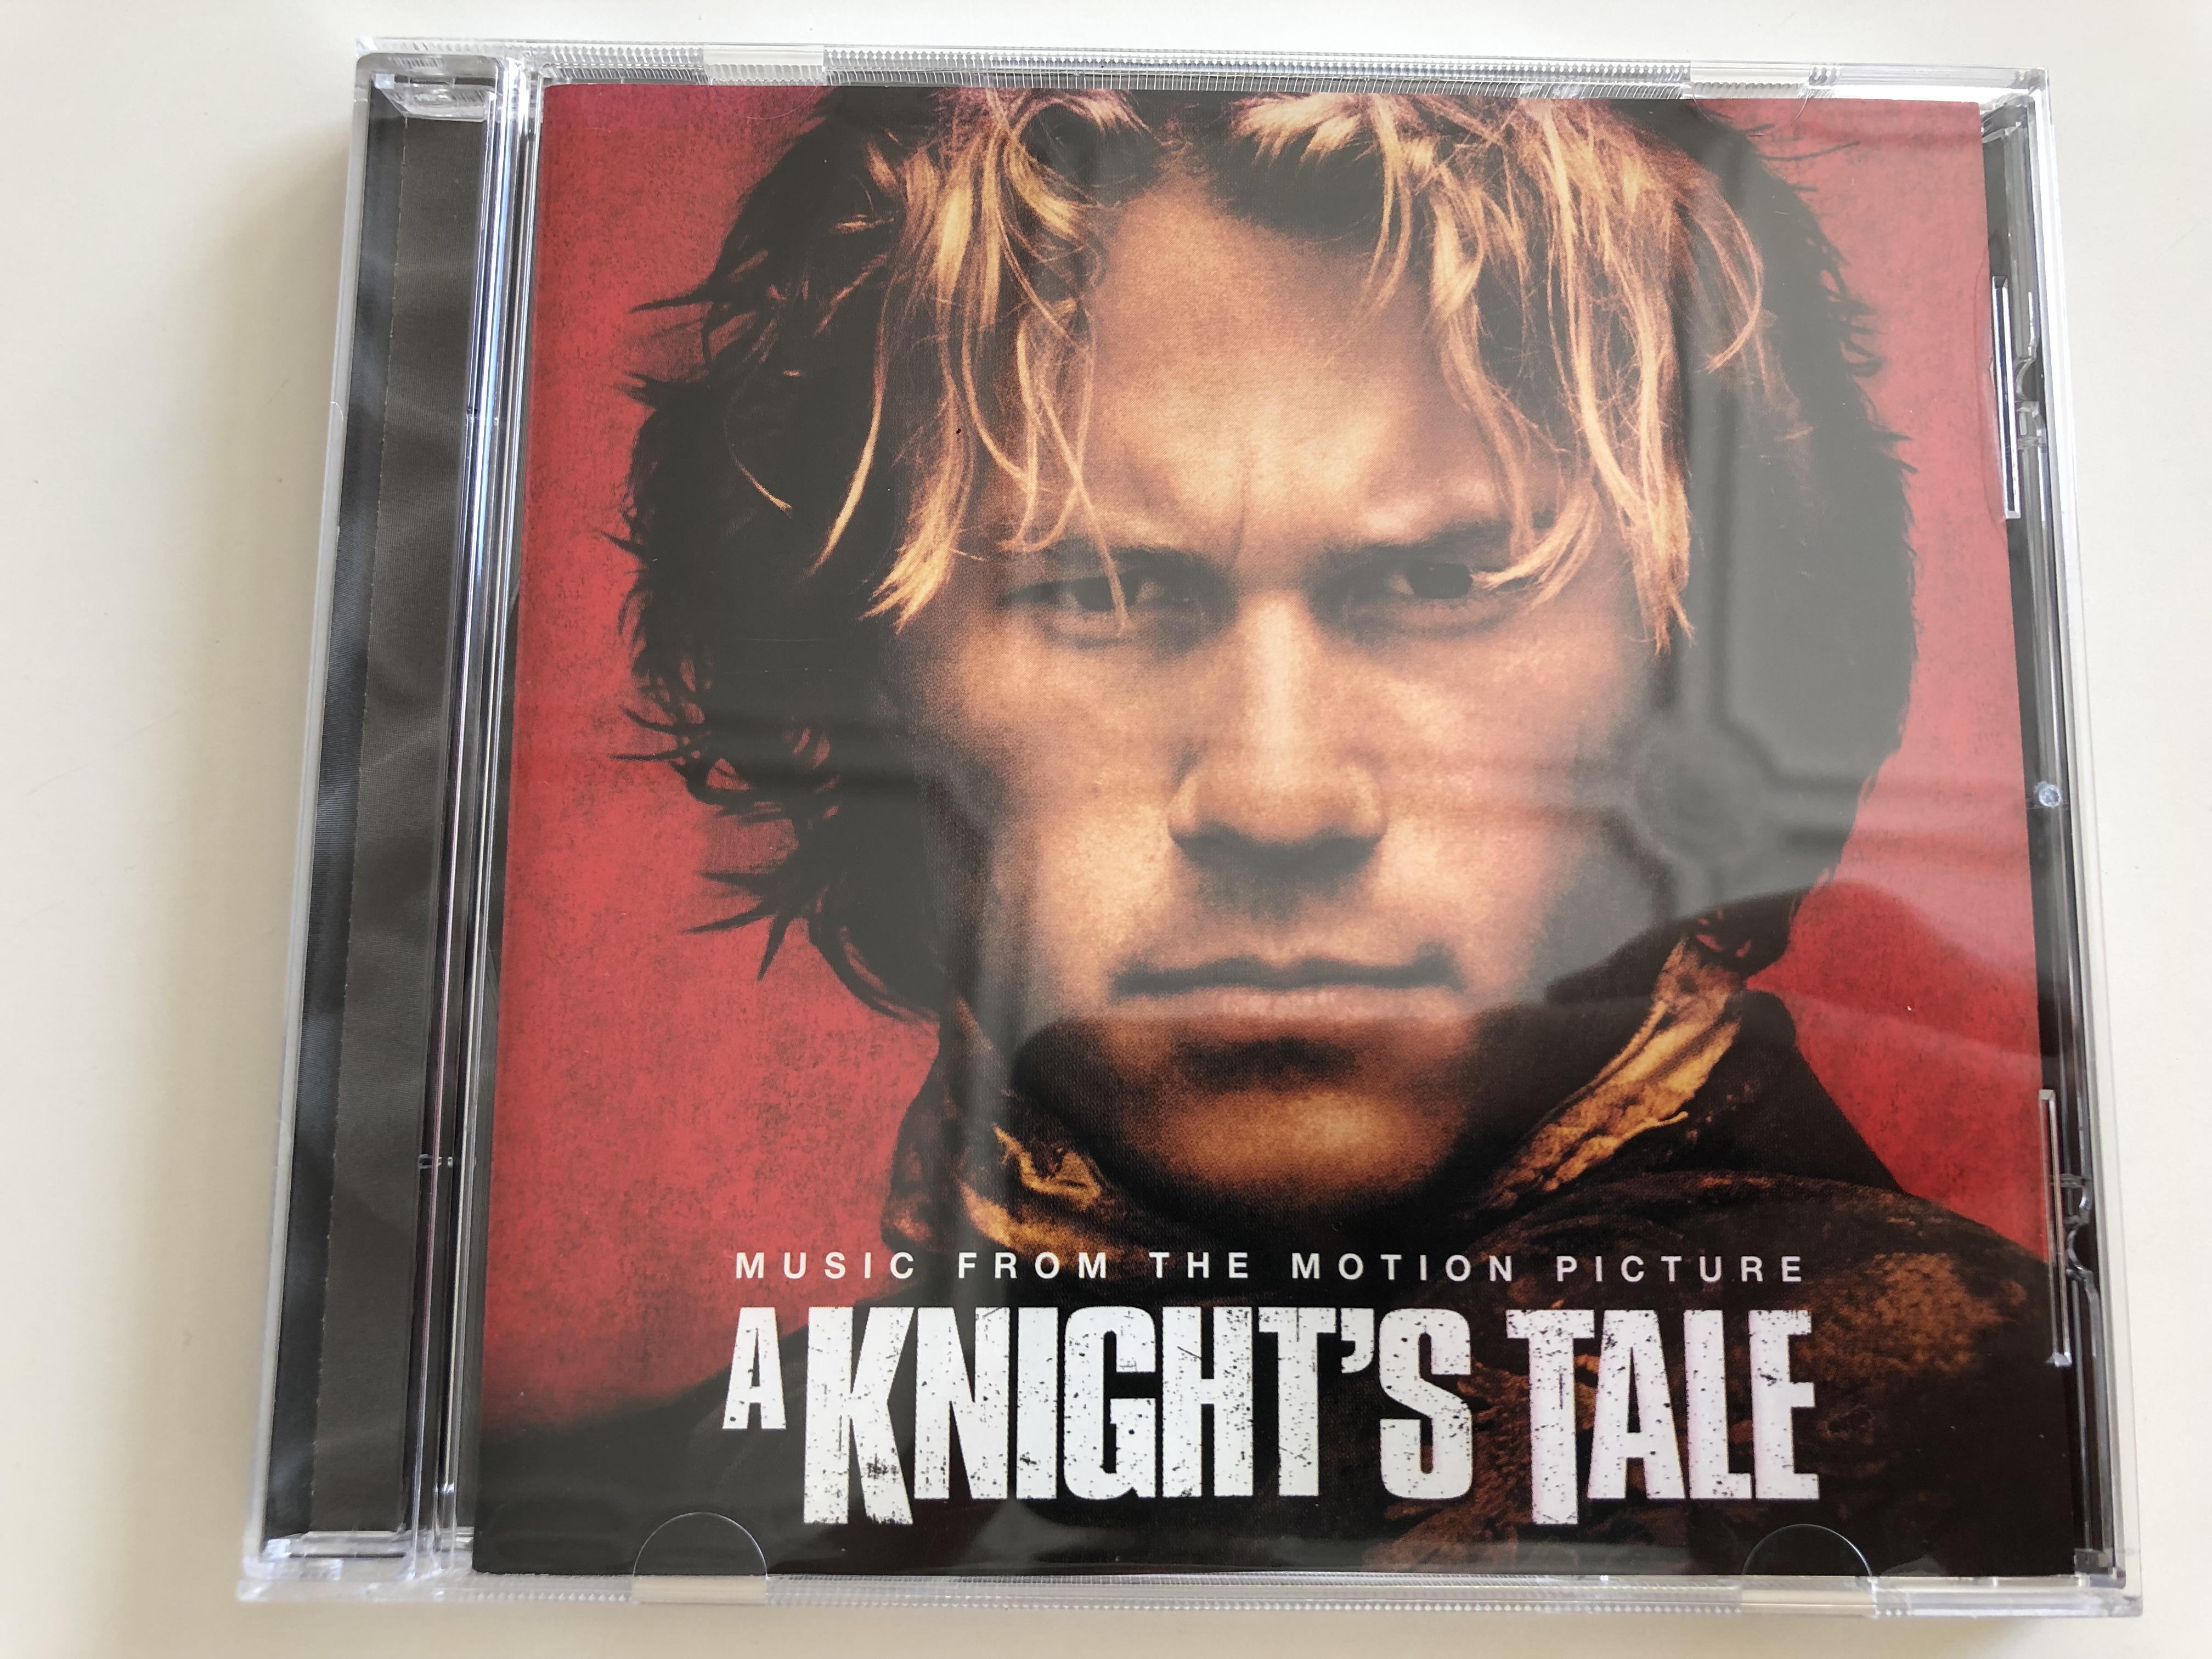 a-knight-s-tale-heath-ledger-mark-addy-rufus-sewell-music-from-the-motion-picture-audio-cd-2001-sony-music-1-.jpg